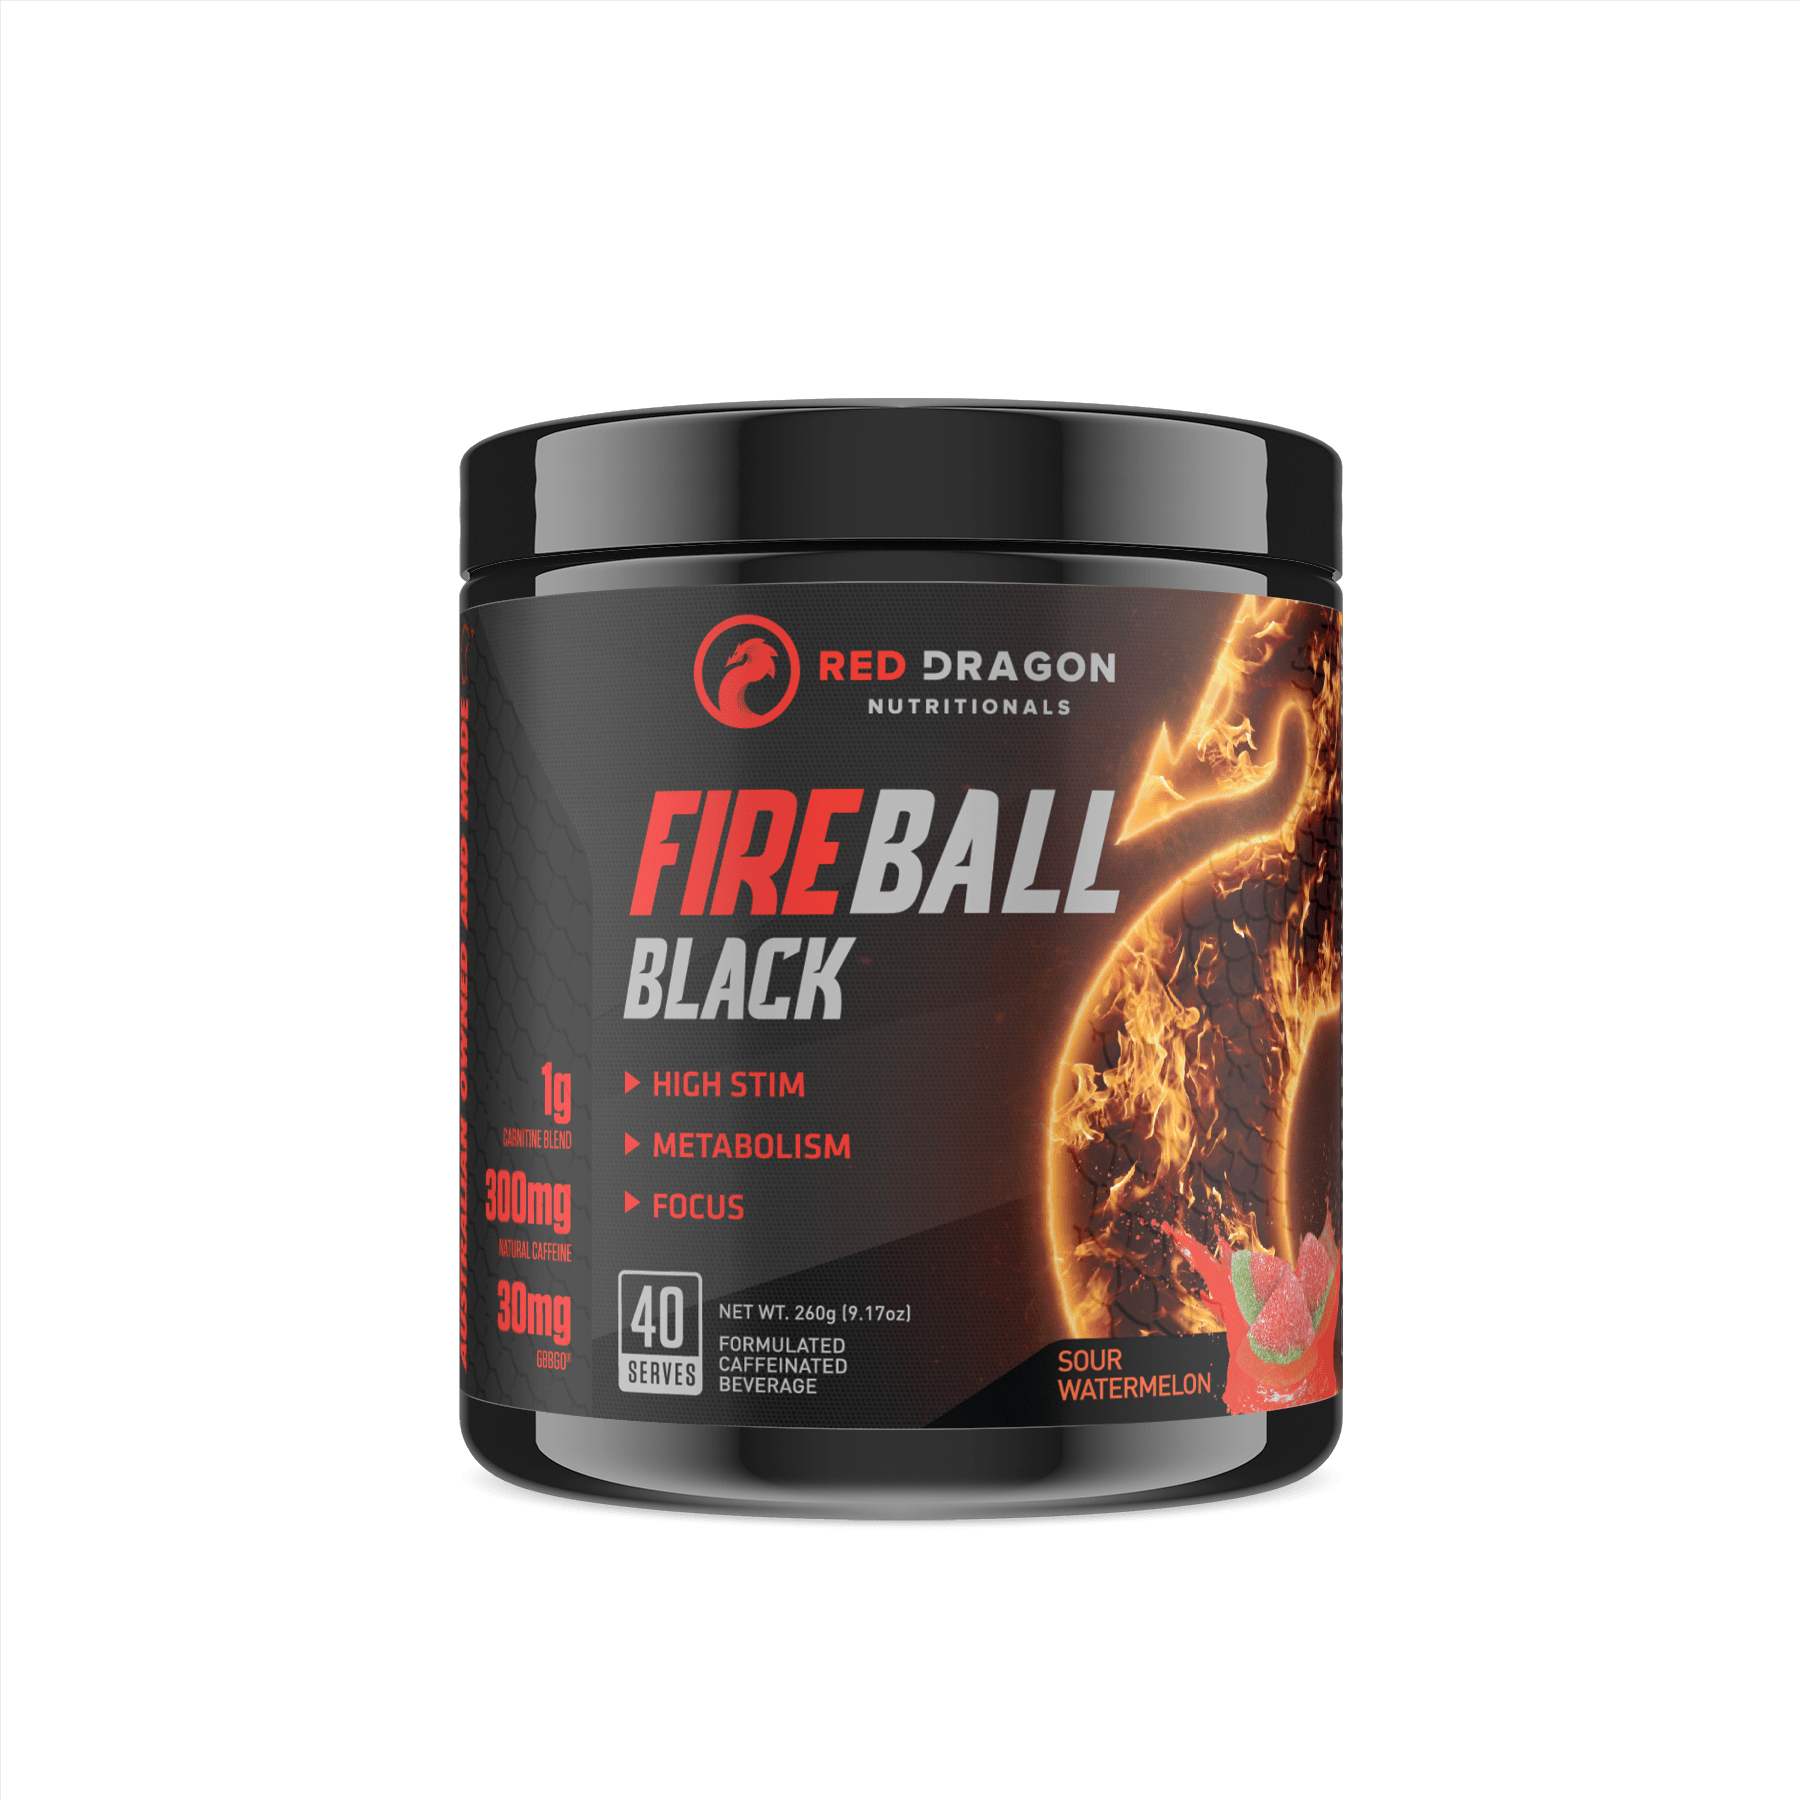 Fitness Hero presents the all NEW Fireball Black Thermogenic Fat Burner By Red Dragon. Fireball Black, through synergy and clinical doses creates a one-stop shop for torching those unwanted fatty stores. Fireball Black provides hard-hitting energy, mental clarity and an increase in thermogenesis, and GBBGO® to keep carnitine levels elevated for longer. 